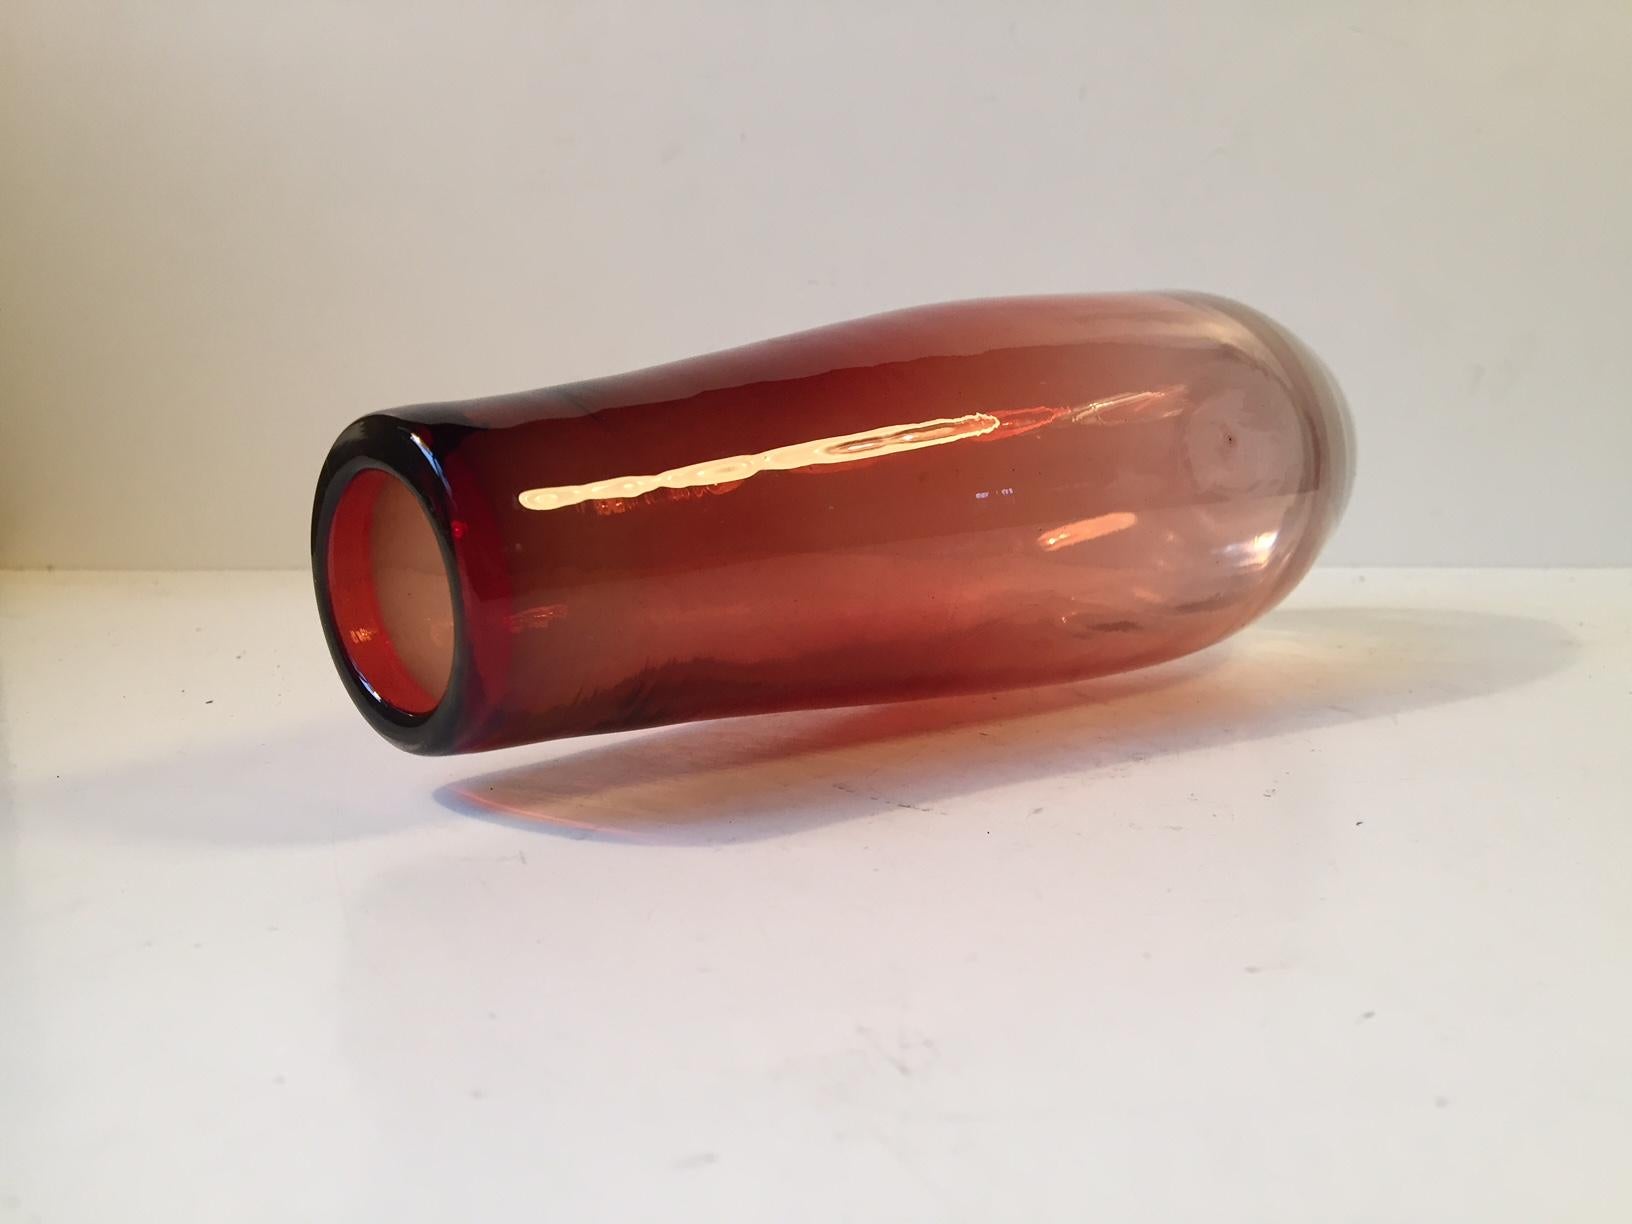 This red and clear glass vase was designed by Nils Landberg in the mid-1950s and manufactured by Orrefors in Sweden. Due to wear, the signature on the base is very faint.